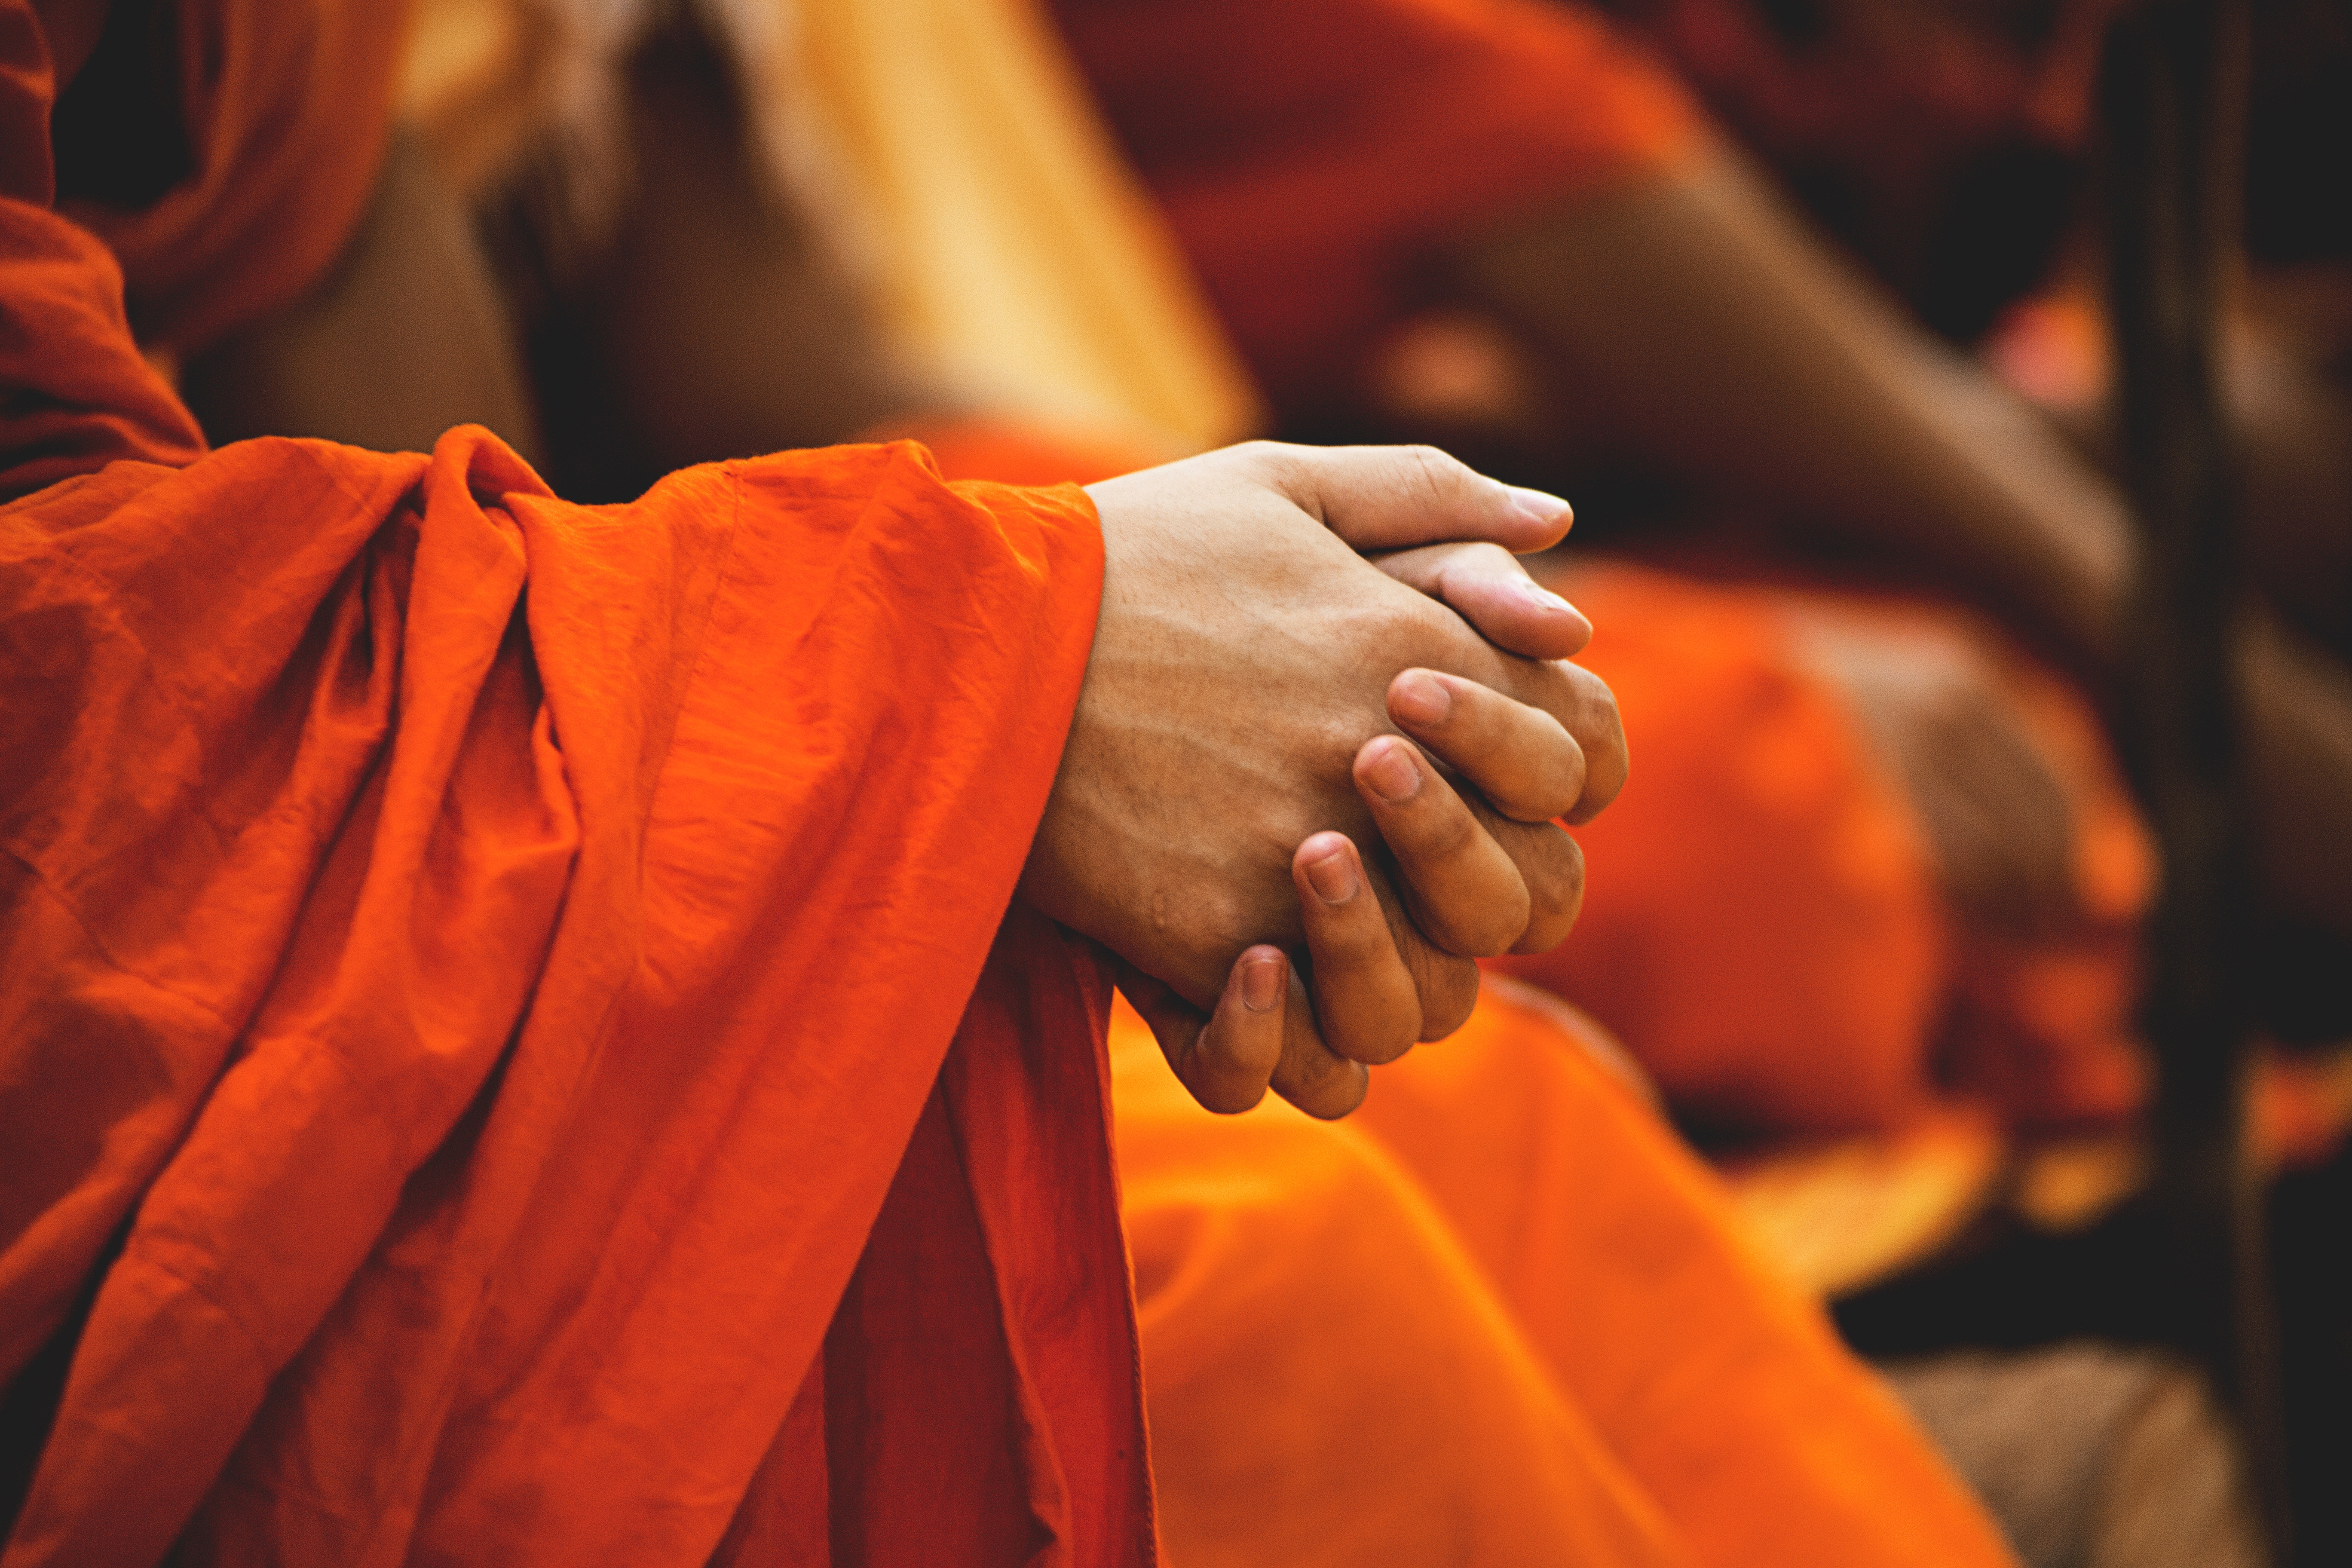 A person is sitting in the foreground but only their clasped hands and forearms are in the photo. They are wearing orange robes.